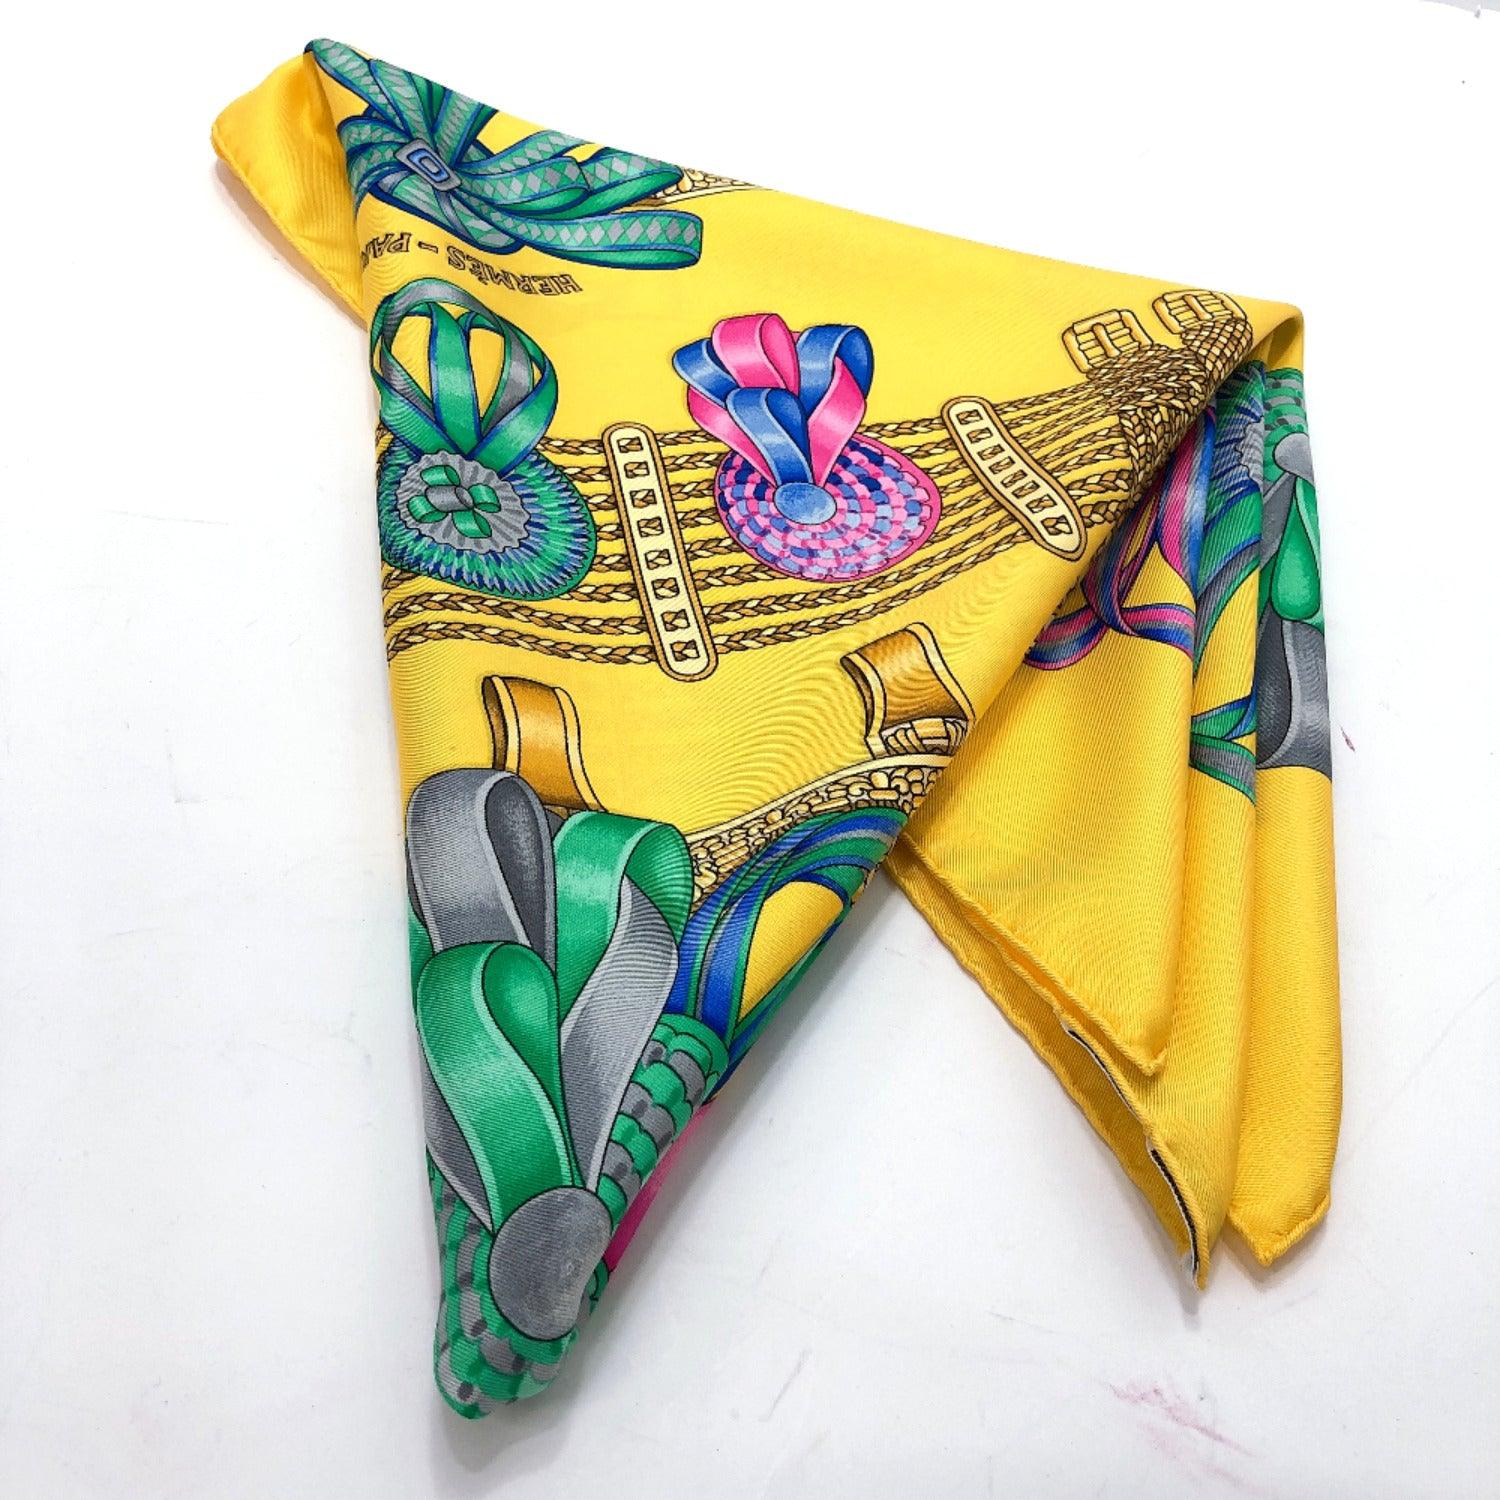 HERMES Scarf Carre90 Yellow LVDOVICVS MAGNVS PARIS Silk 100% Ships From  Japan !!